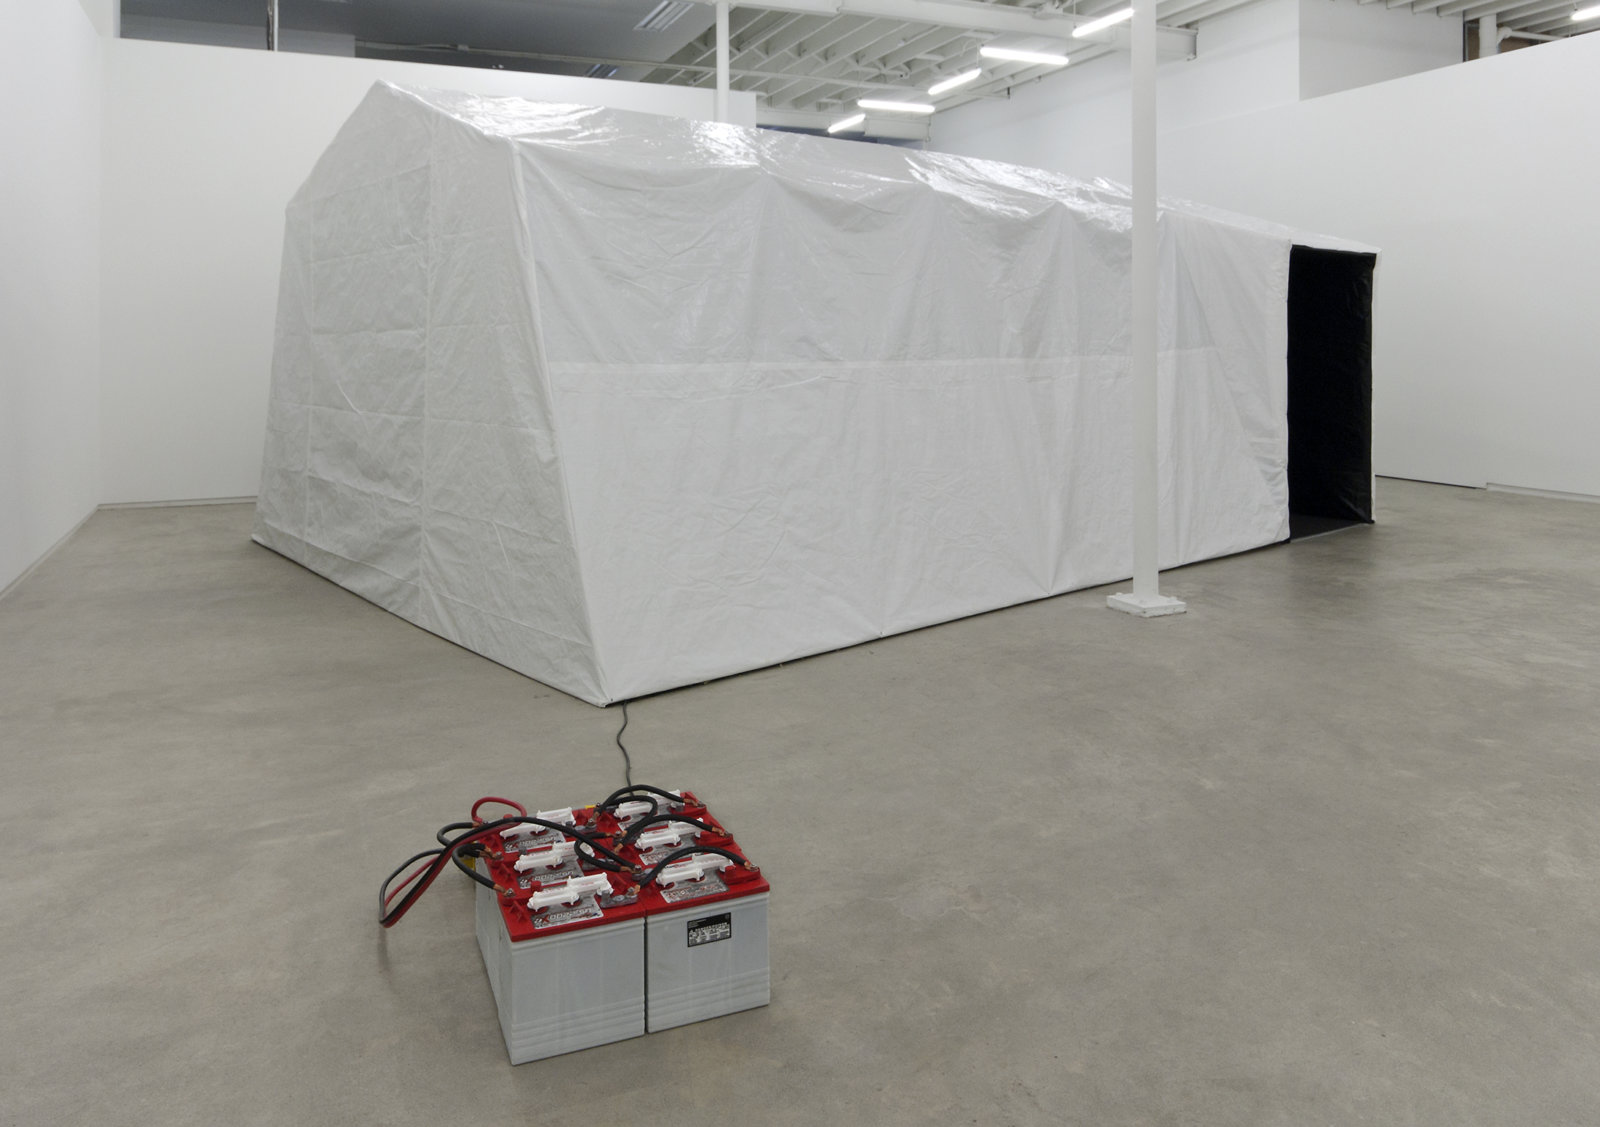 Kevin Schmidt, Autonomous Projection Room #1, 2010, tarp, portable garage frame, carpet, roxul, projector, home stereo system, screen, batteries, inverter, camping chairs, 181 x 60 x 105 in. (460 x 152 x 267 cm)